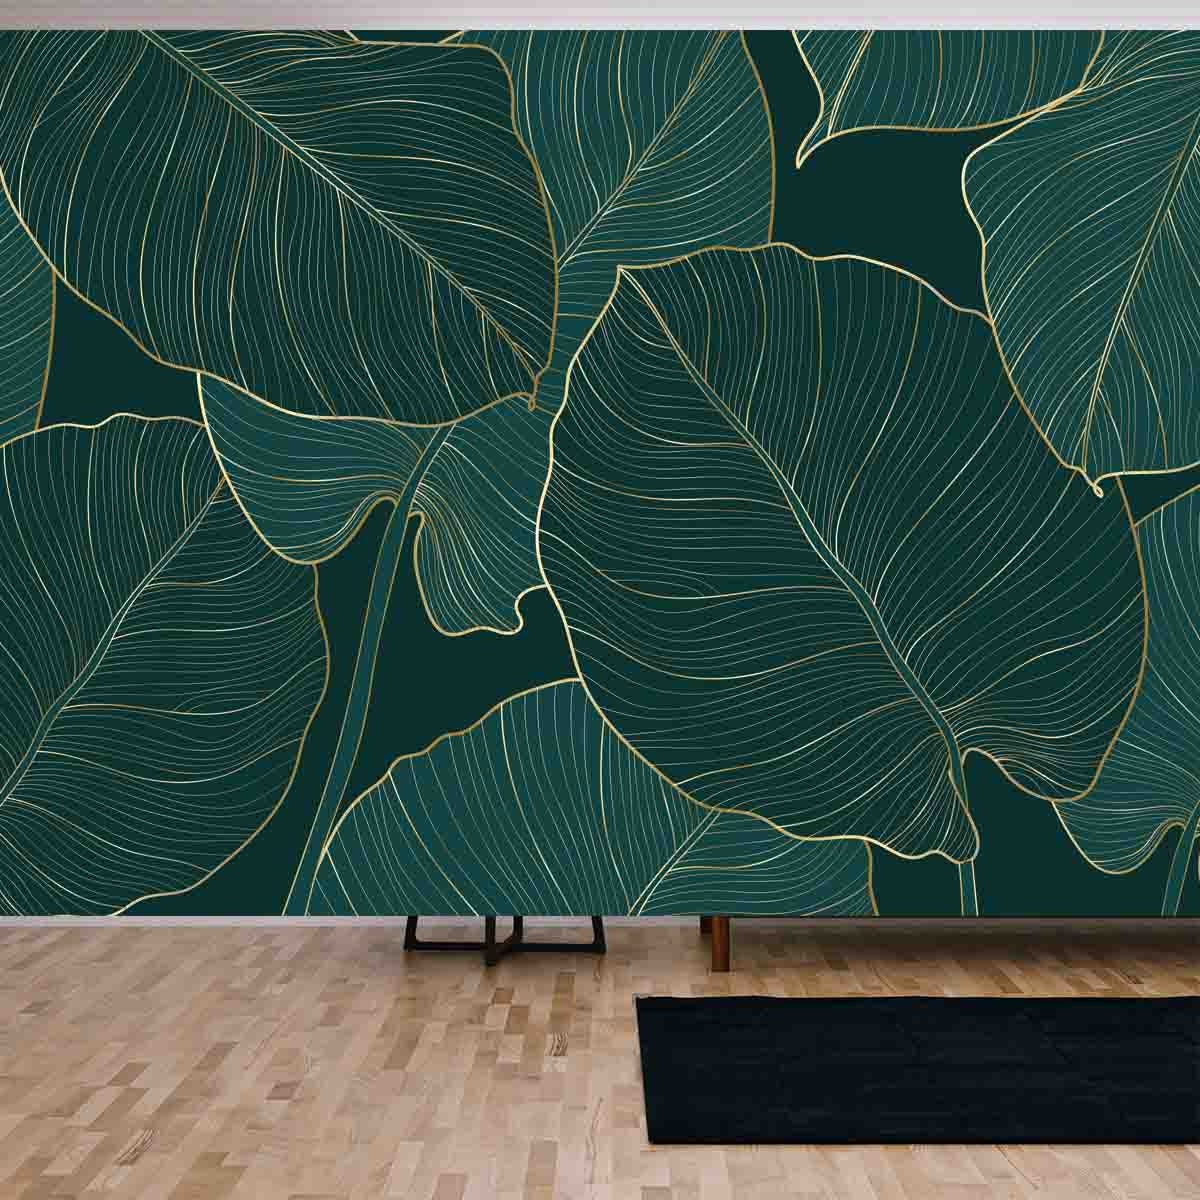 Luxury Gold and Nature Green Wallpaper Living Room Mural